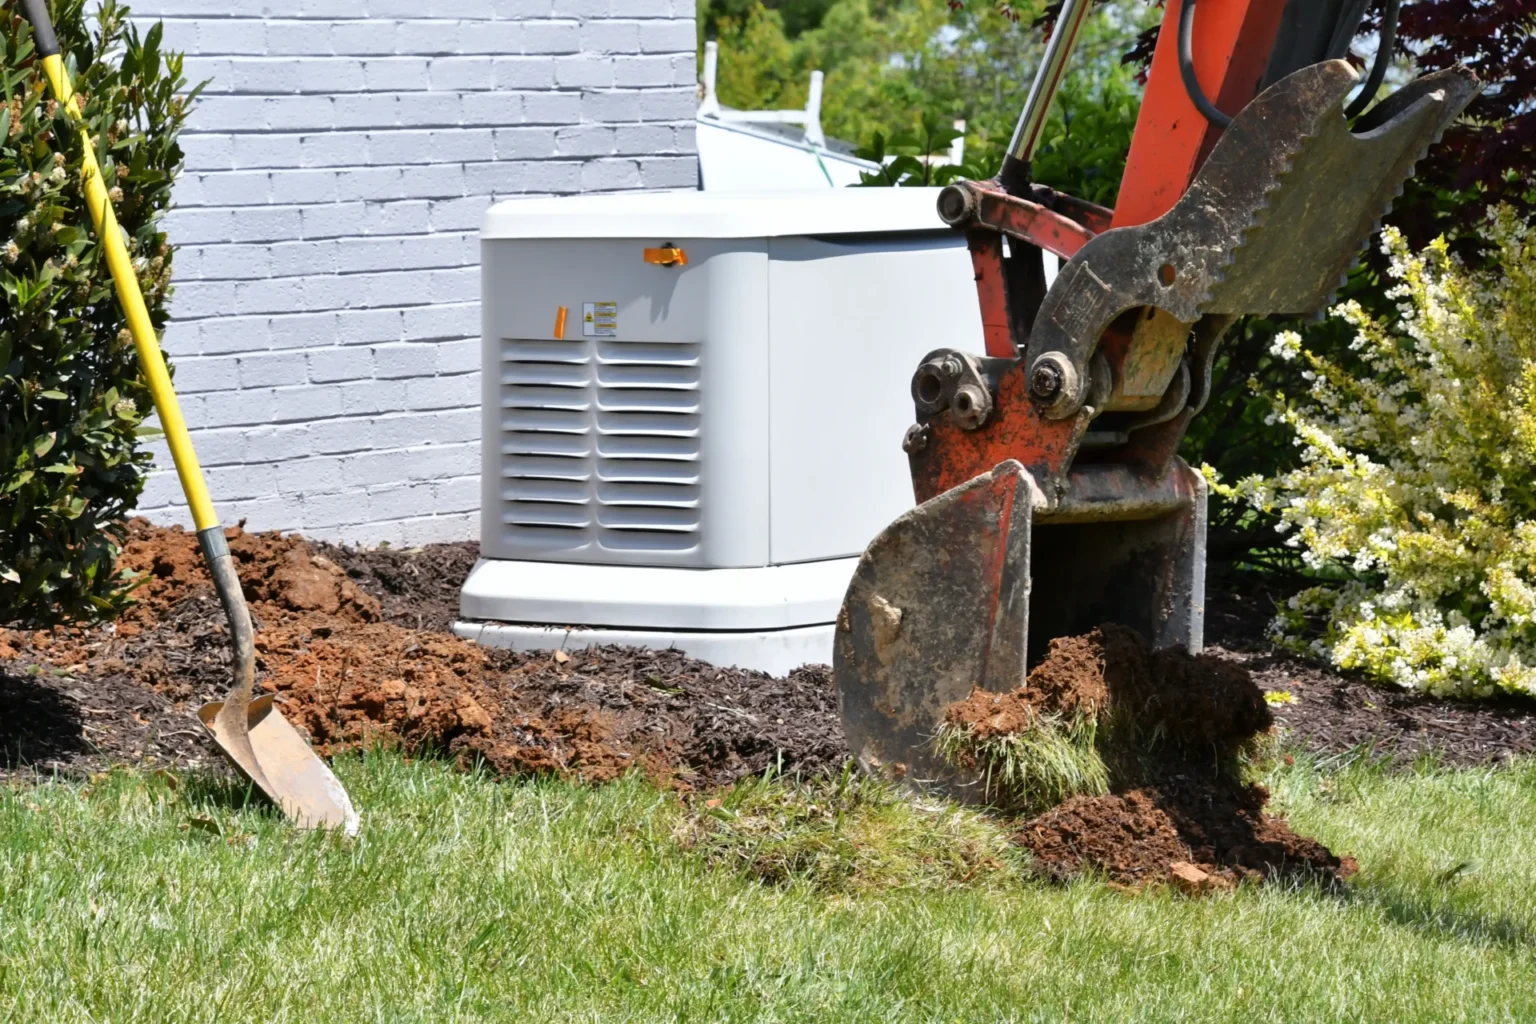 backhoe-digging-dirt-in-lawn-to-install-electrical- Backup Generator-fort collins electrical supply